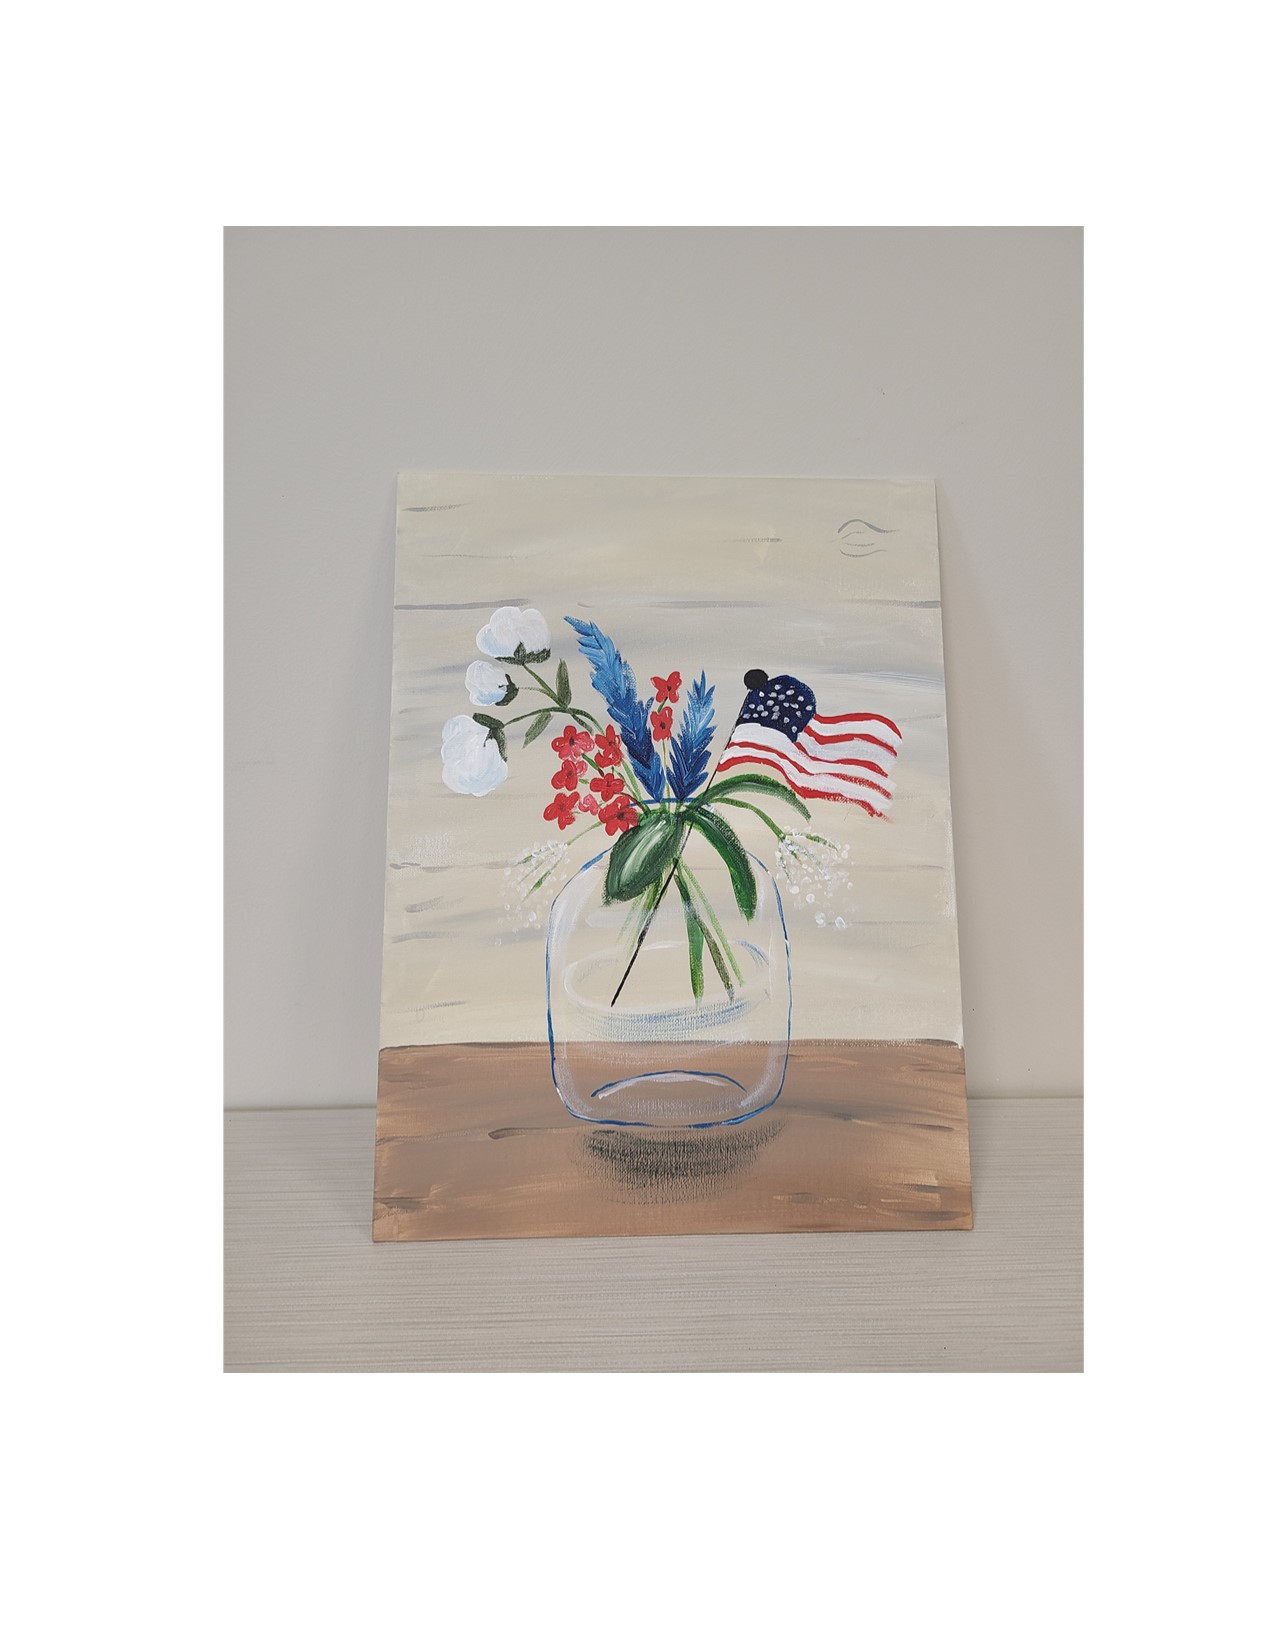 Painting of a jar with small American flag and red, white, and blue flowers